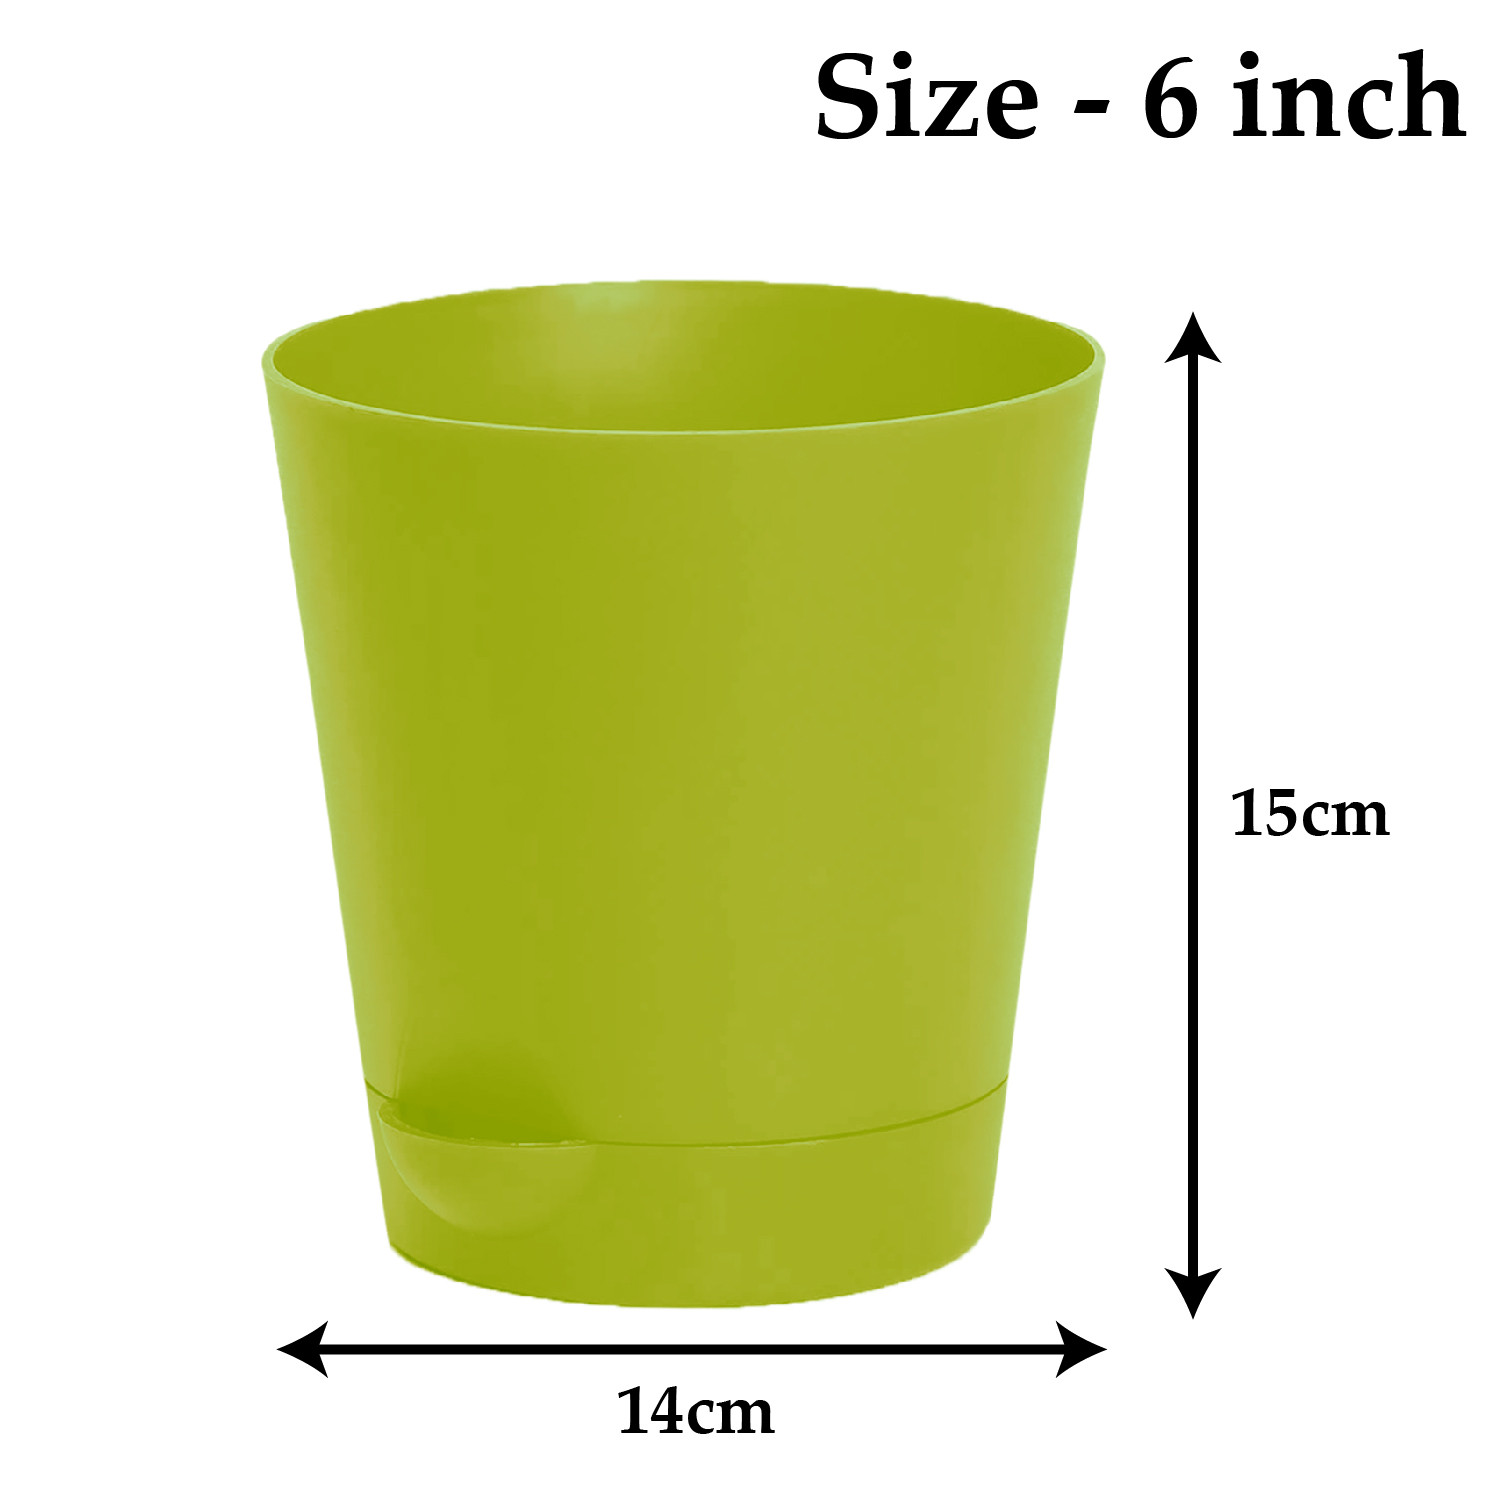 Kuber Industries Plastic Titan Pot|Garden Container For Plants & Flowers|Self-Watering Pot With Drainage Holes,6 Inch (Green)